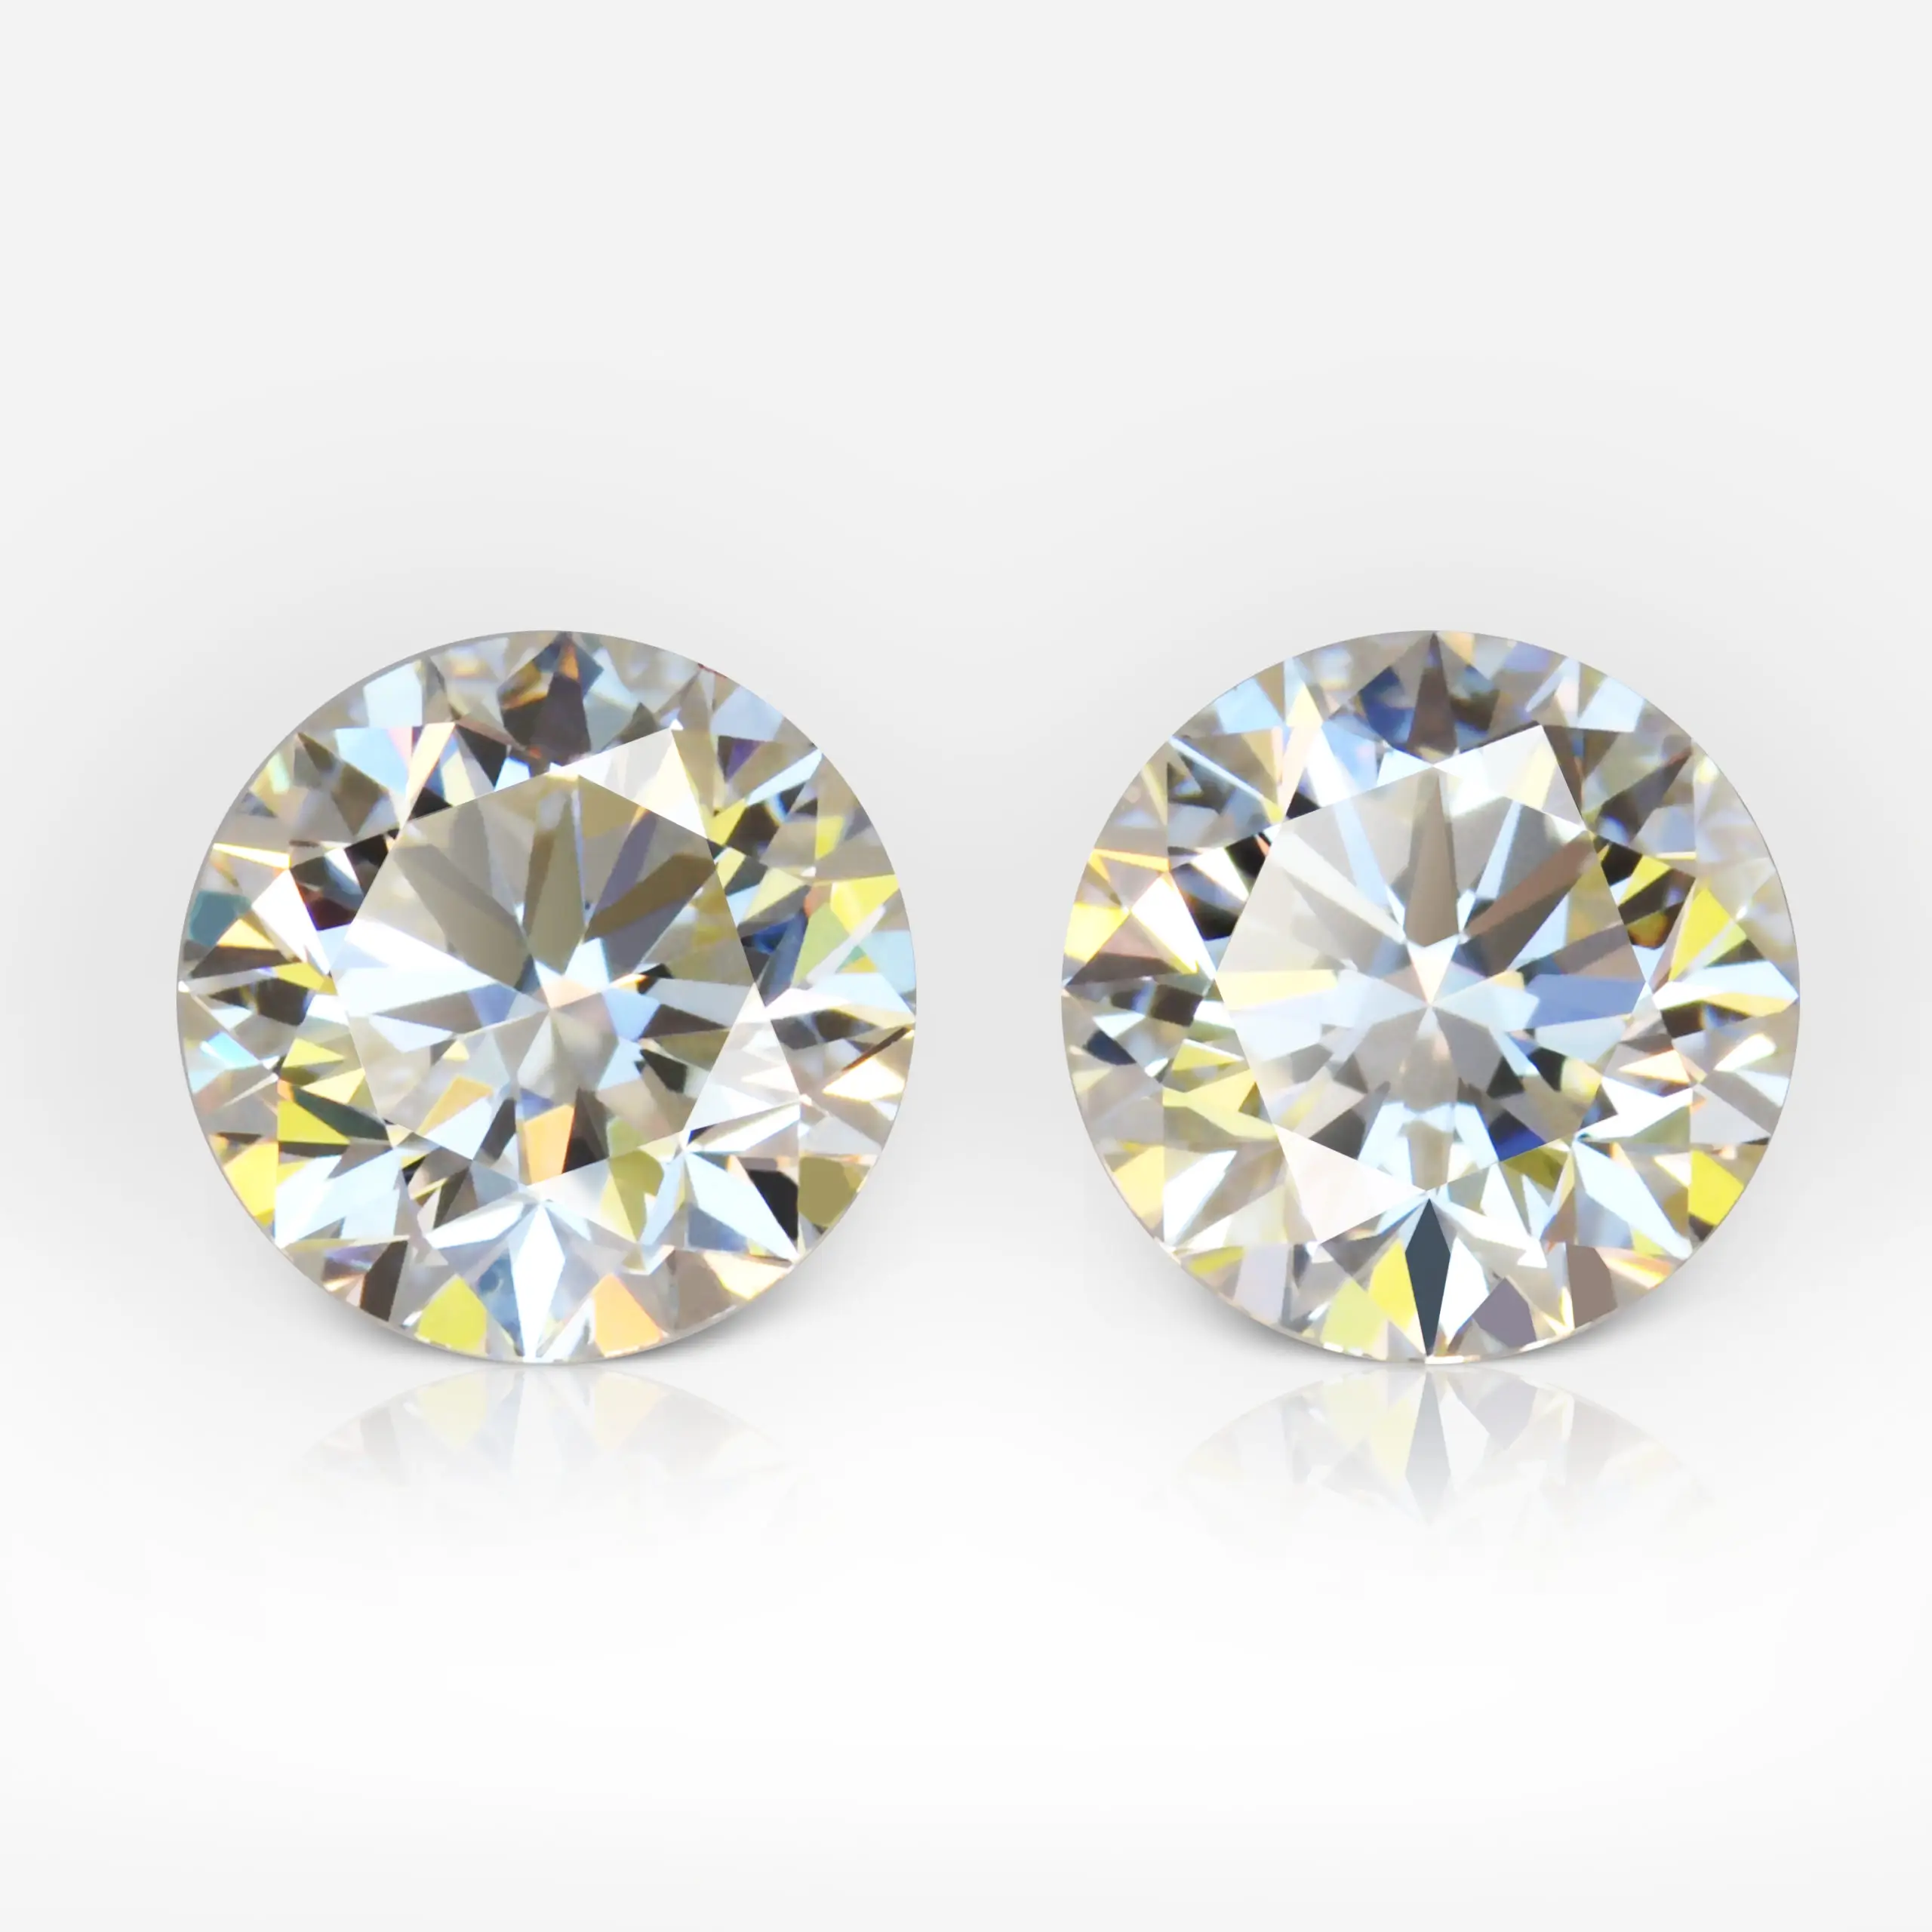 1.0 and 1.0 carat Pair I / J SI2 Round Shape Diamonds GIA - picture 1